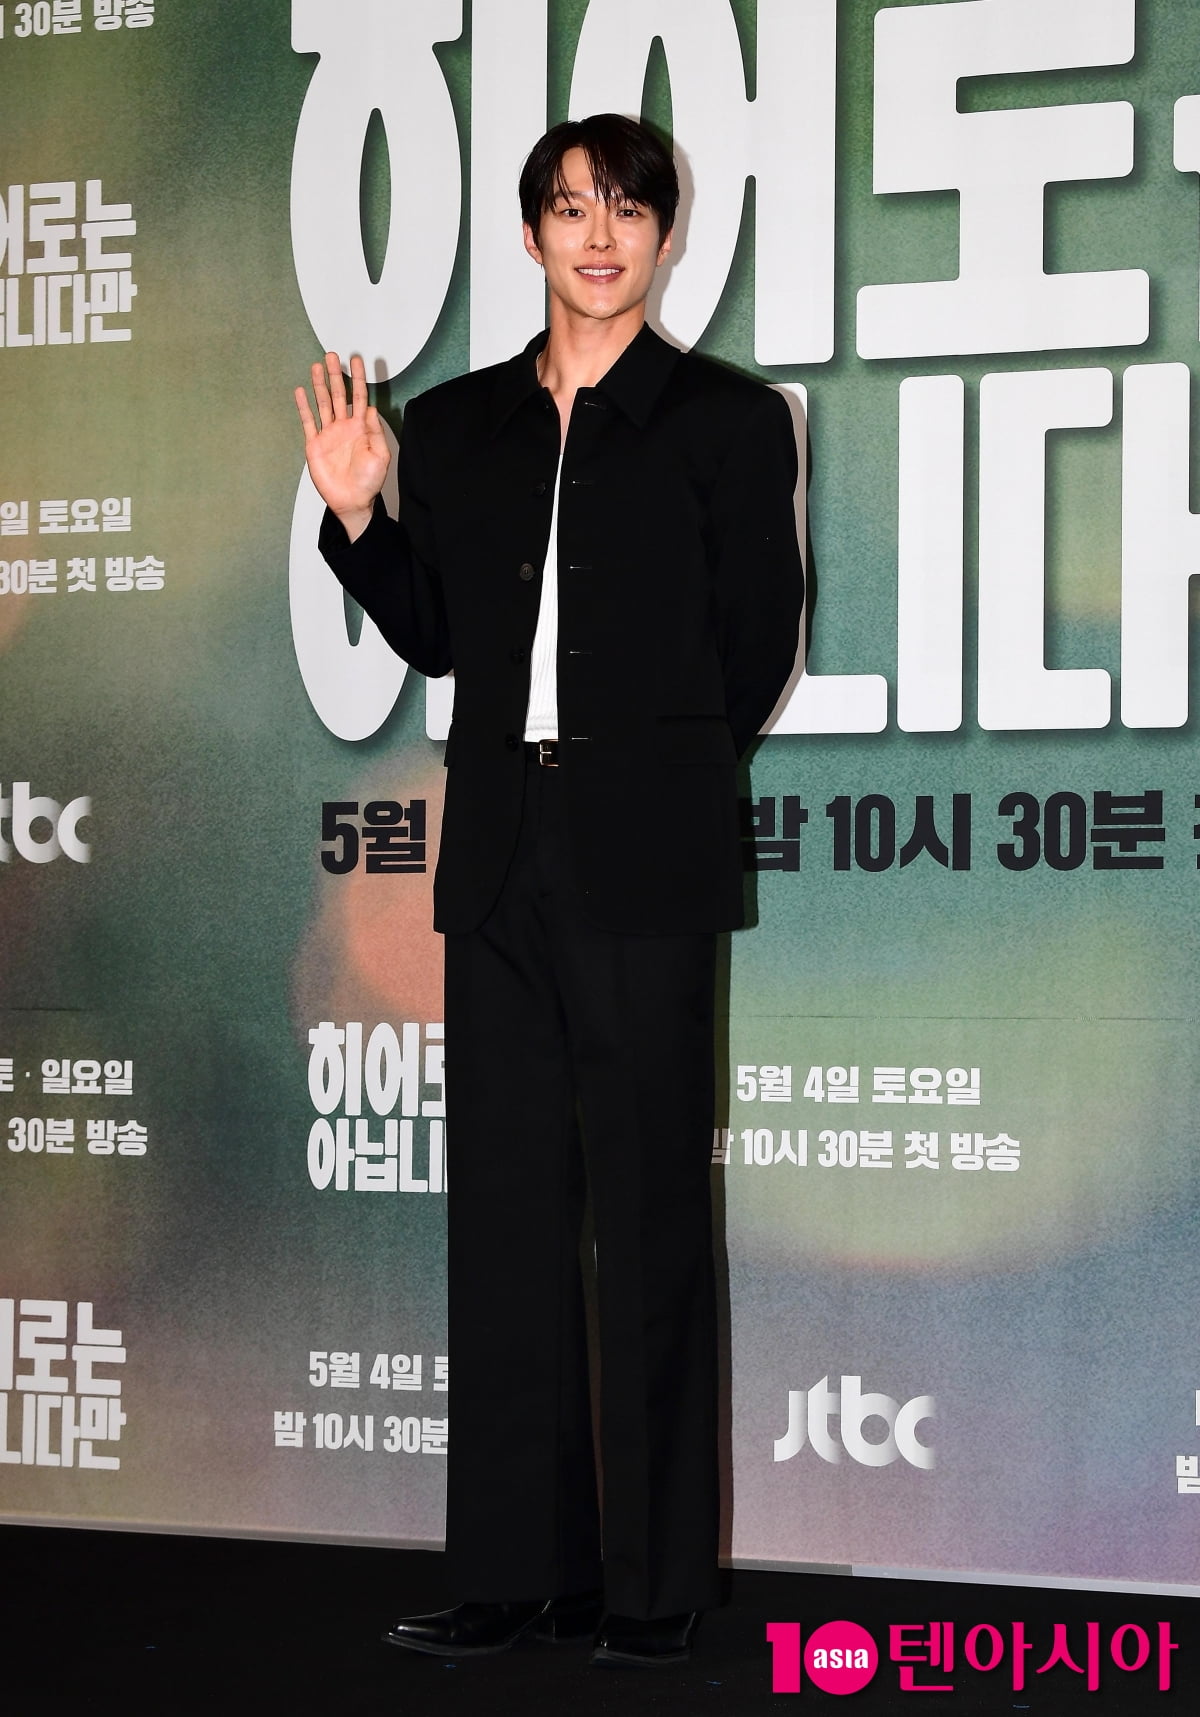 Jang Ki-yong's first comeback after being discharged from the military...A handsome younger man 